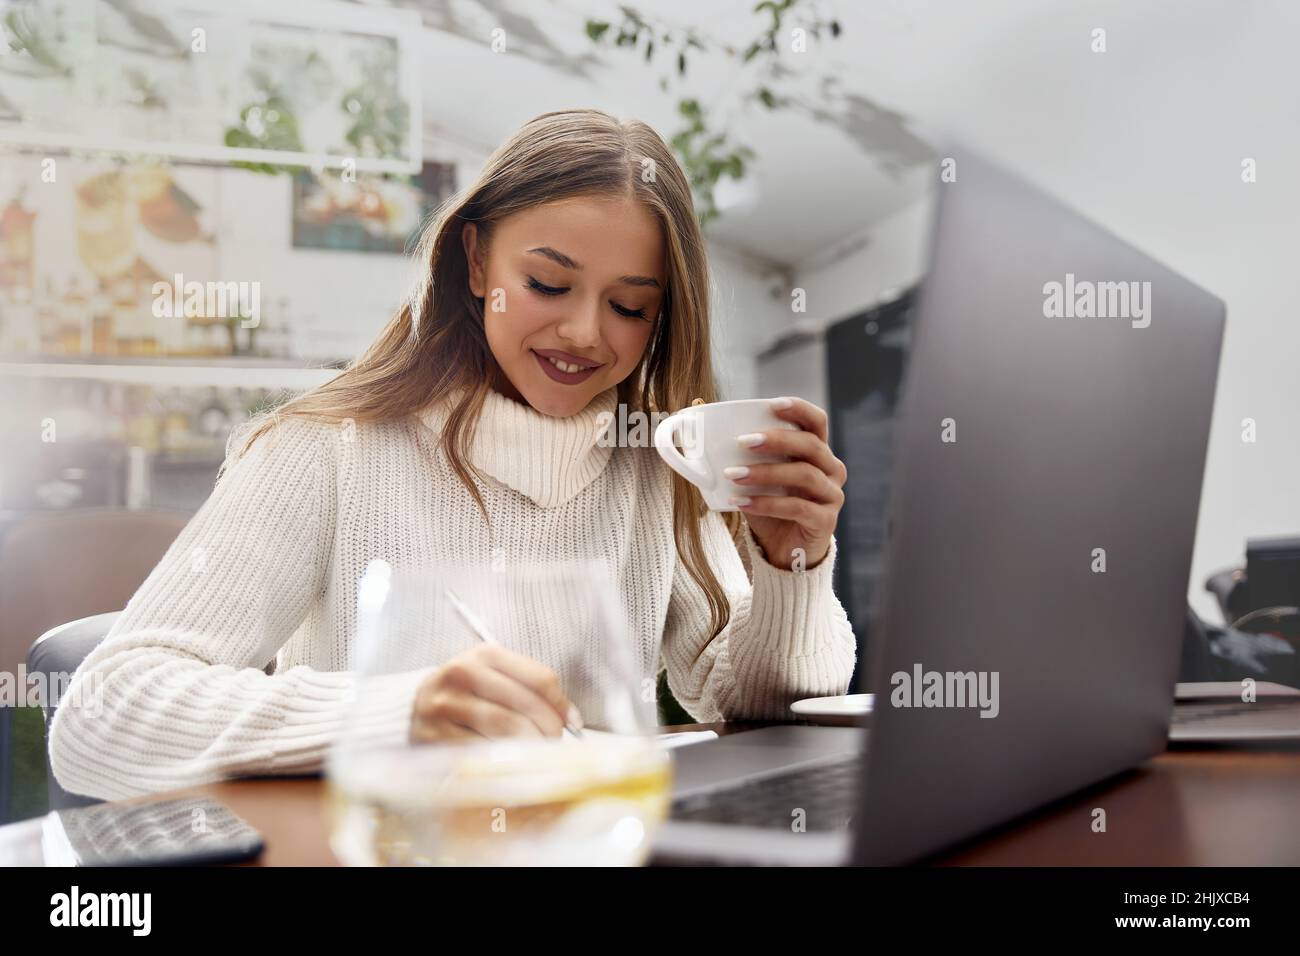 Beautiful woman in a cafe drinking coffee and smiling. Stock Photo